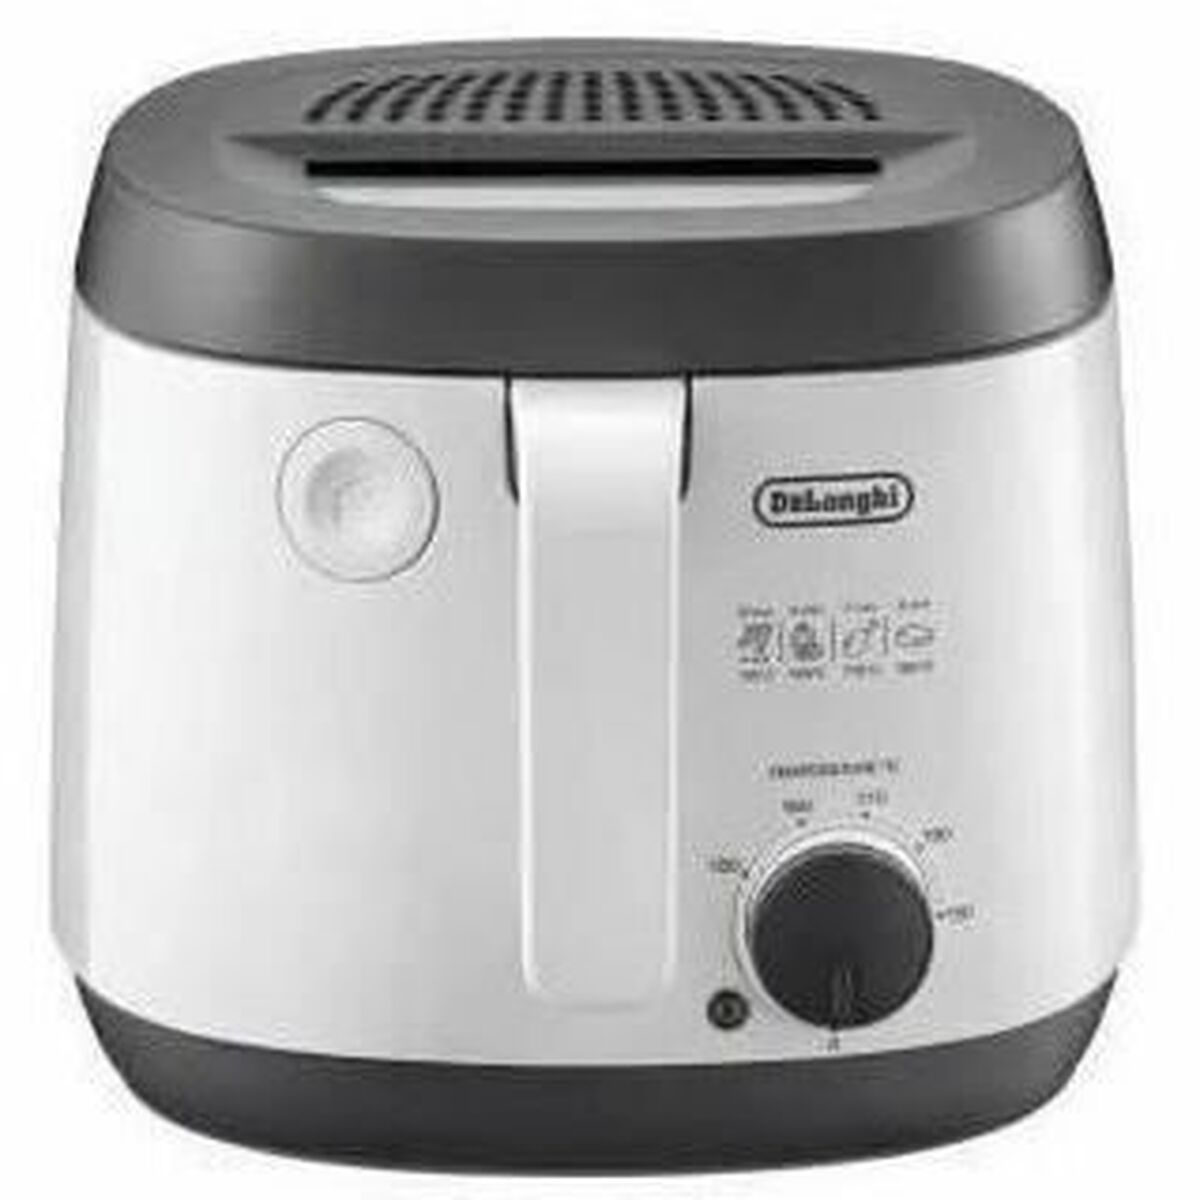 Luchtfriteuse DeLonghi 1800 W 2,3 L